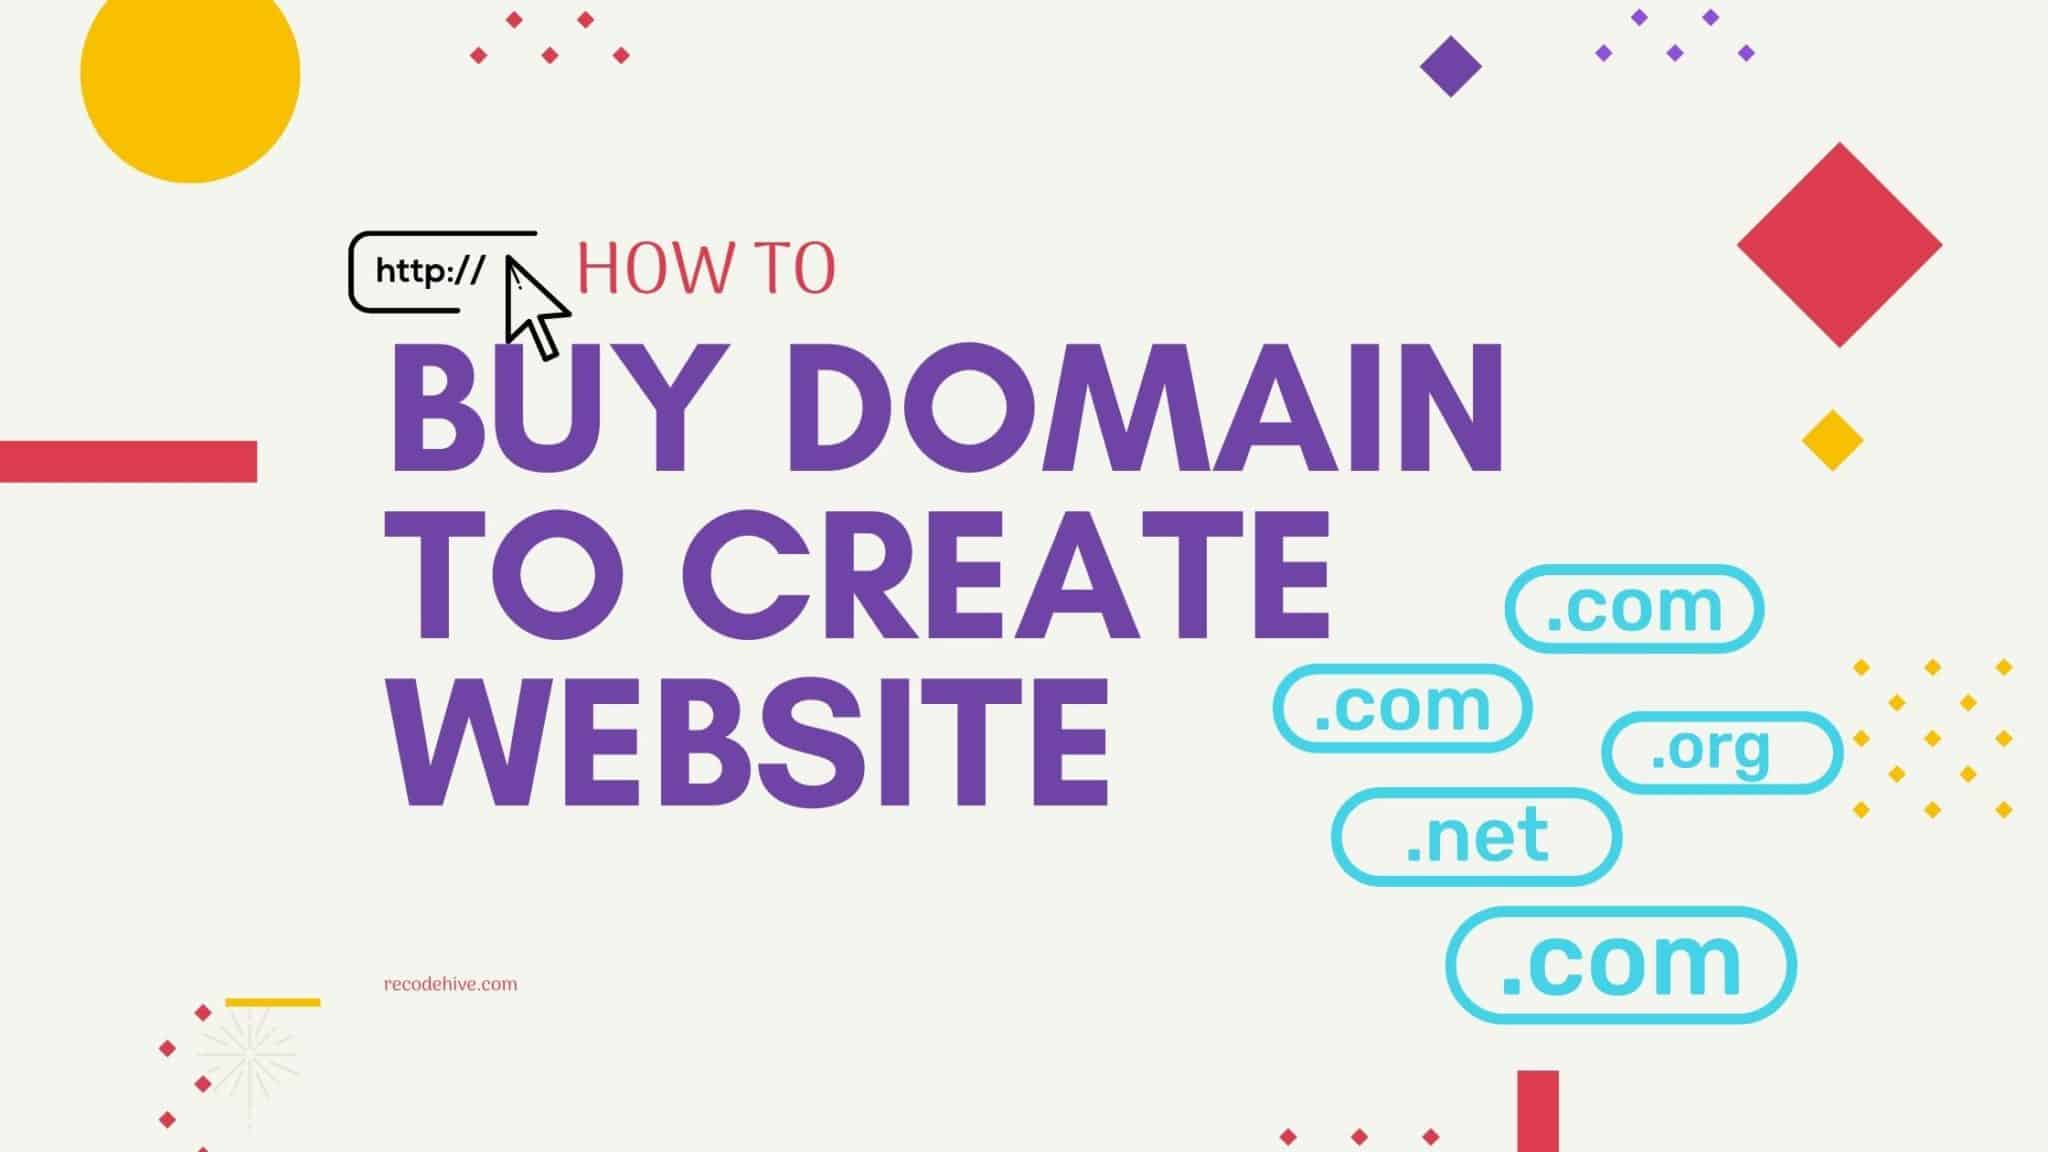 HOW TO PURCHASE A WEBSITE DOMAIN